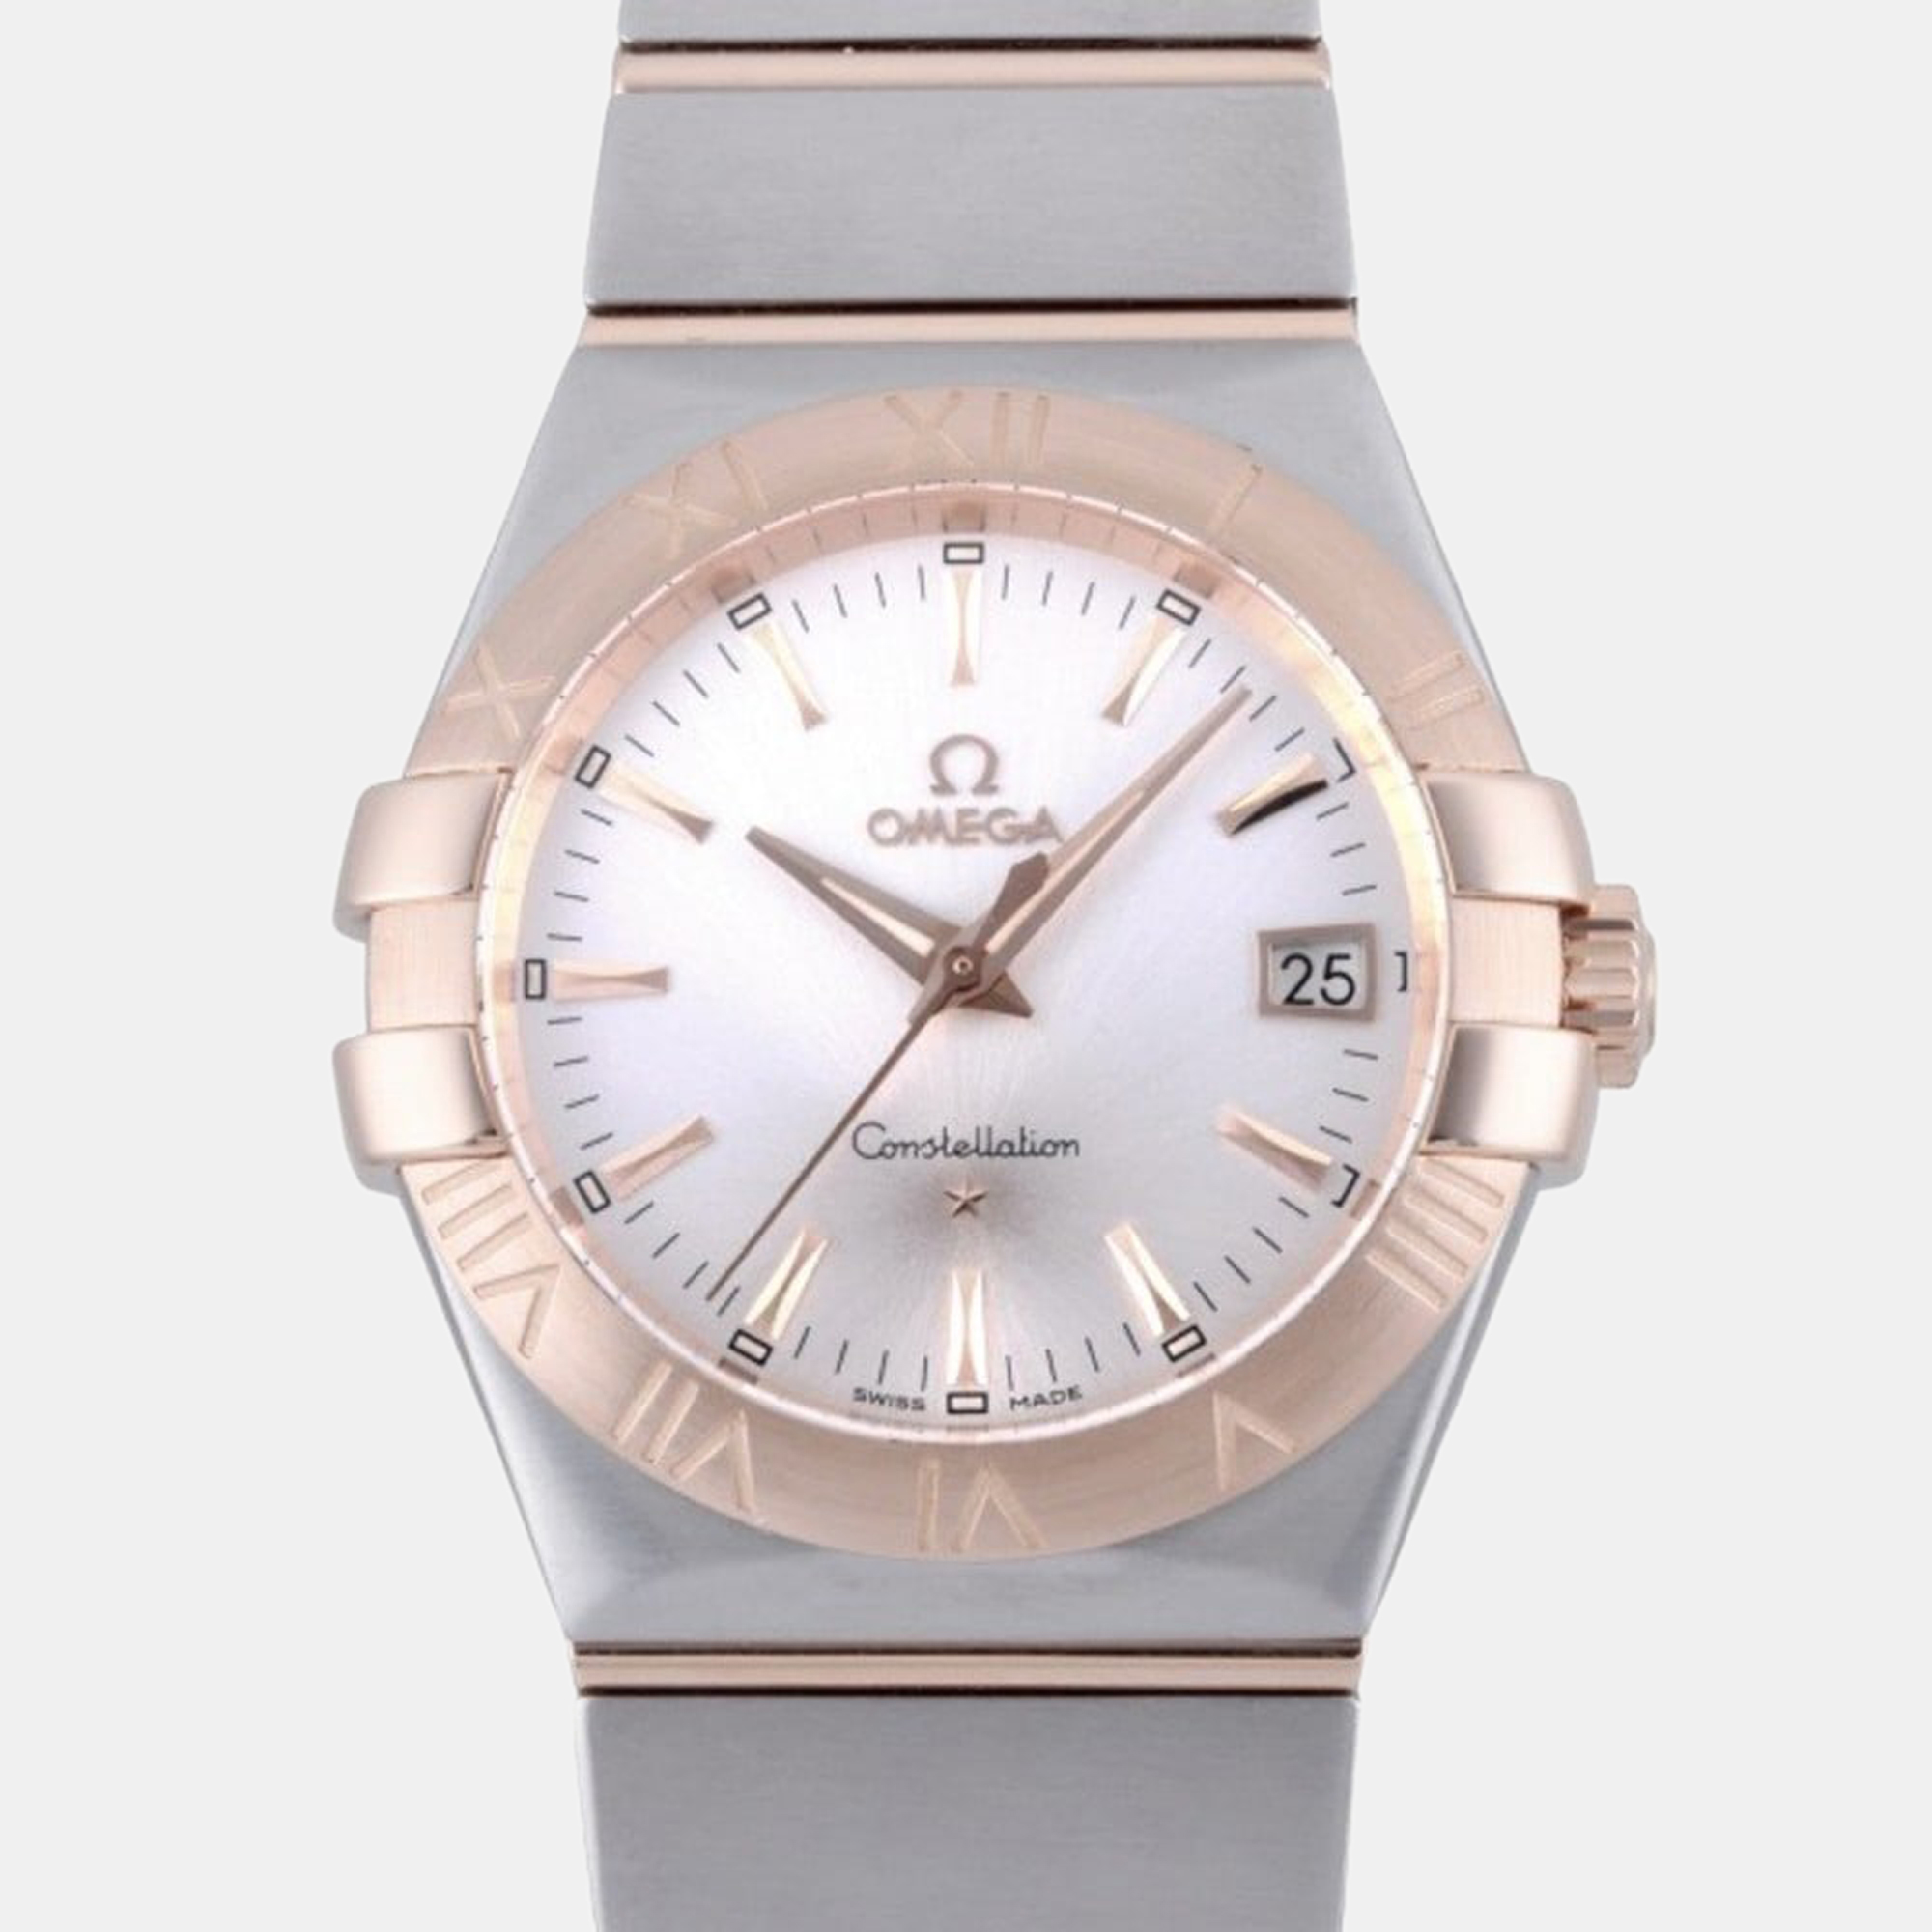 Omega Silver 18k Rose Gold And Stainless Steel Constellation 123.20.35.60.02.001 Quartz Men's Wristwatch 35 Mm